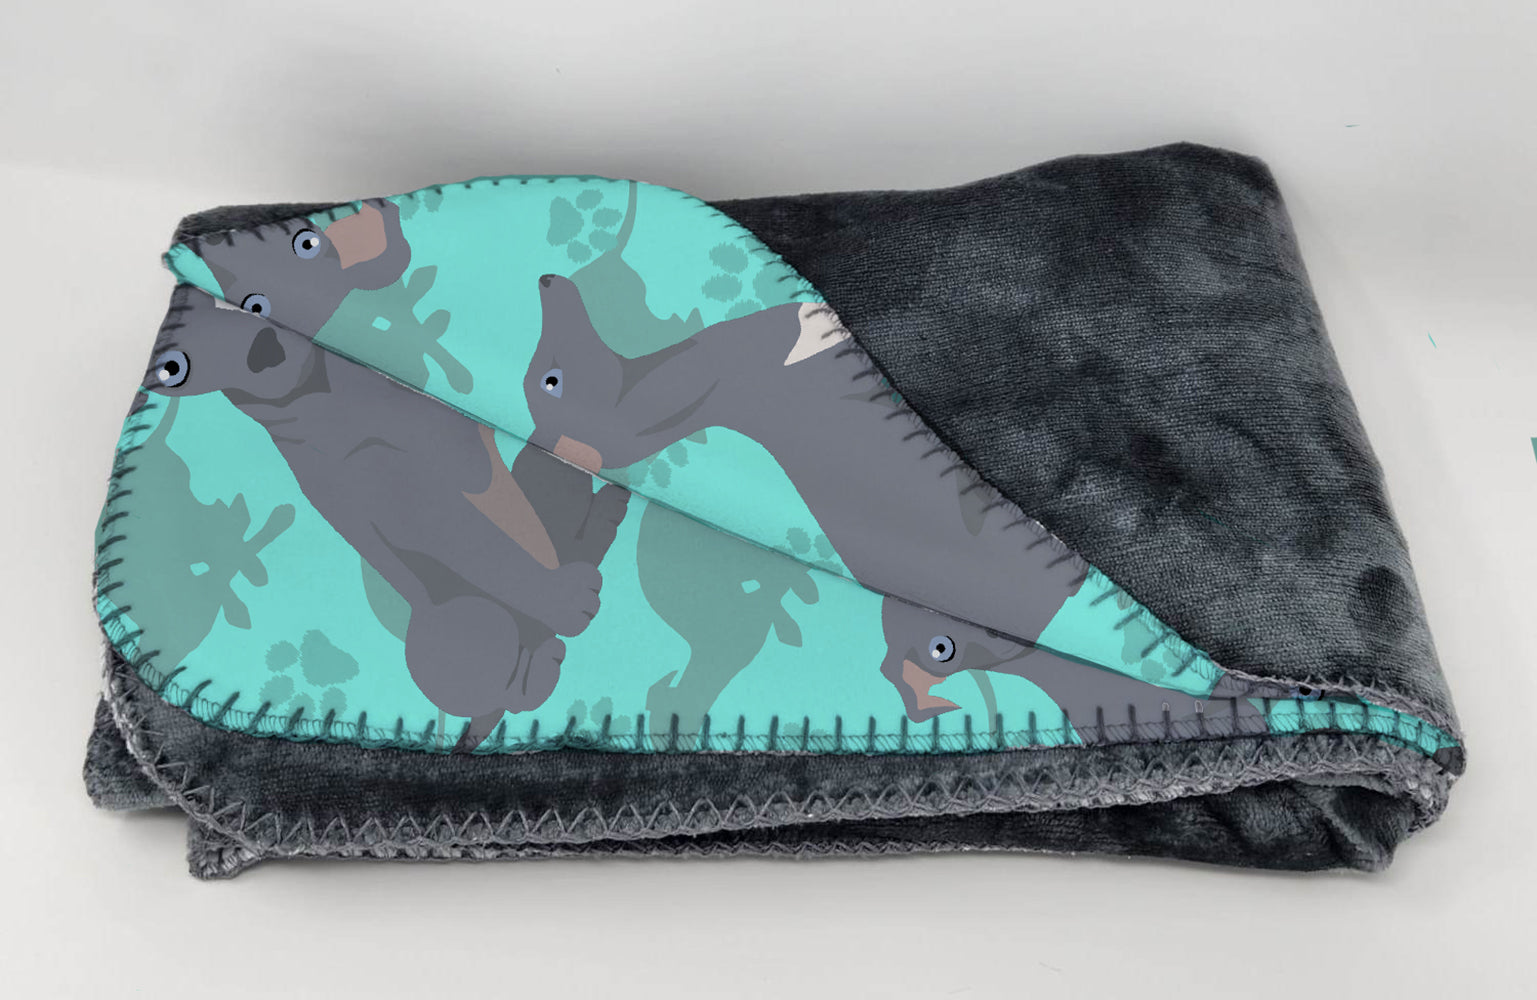 Buy this Italian Greyhound Soft Travel Blanket with Bag